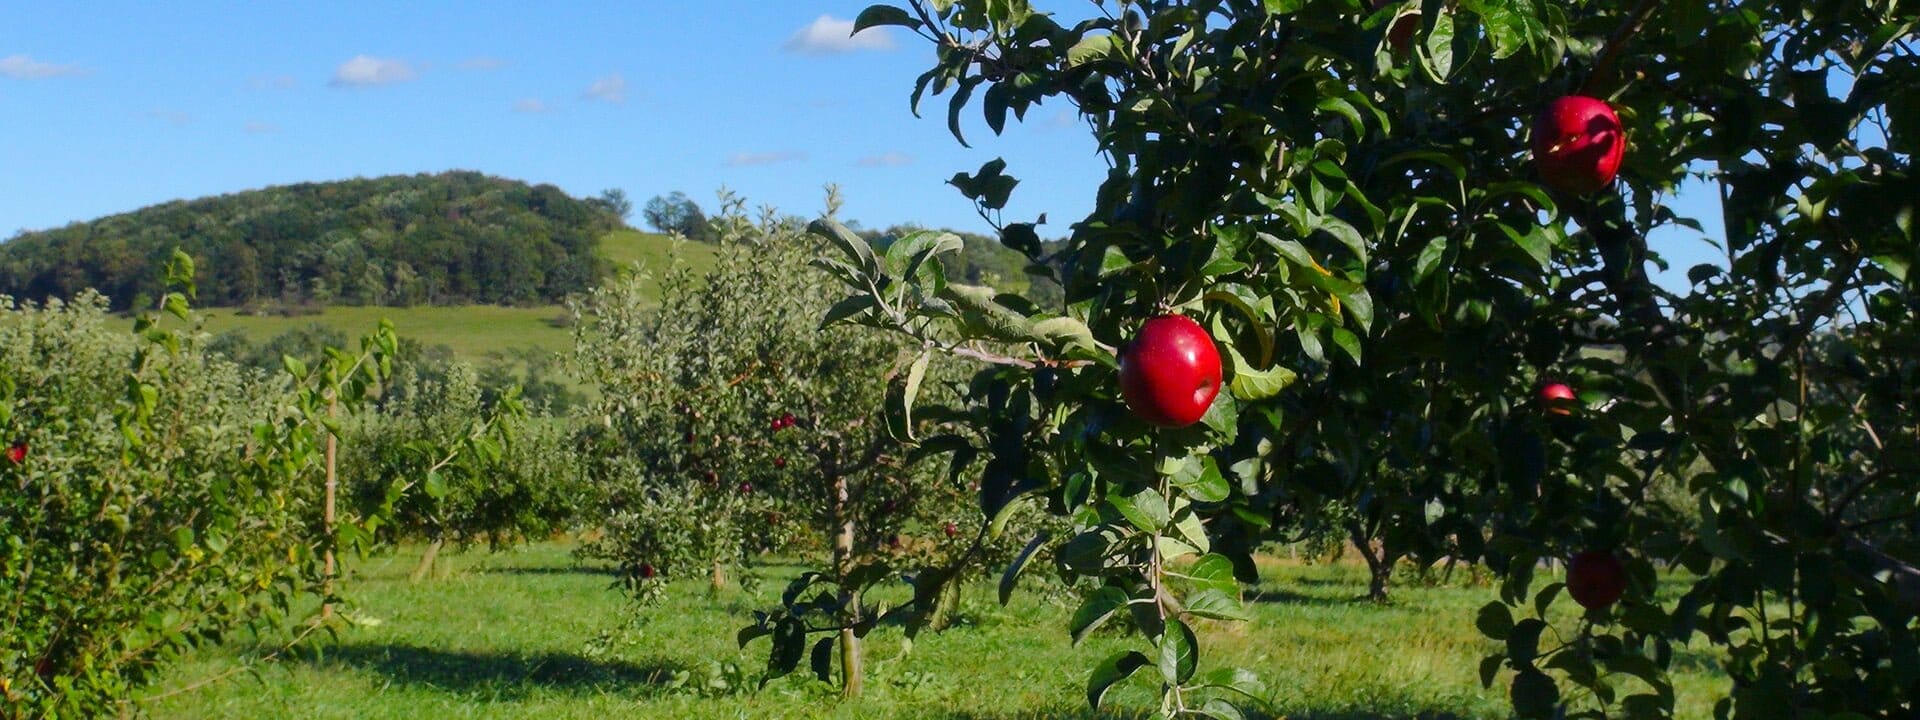 virginia perfection orchard at historic valley view farm apples, peaches